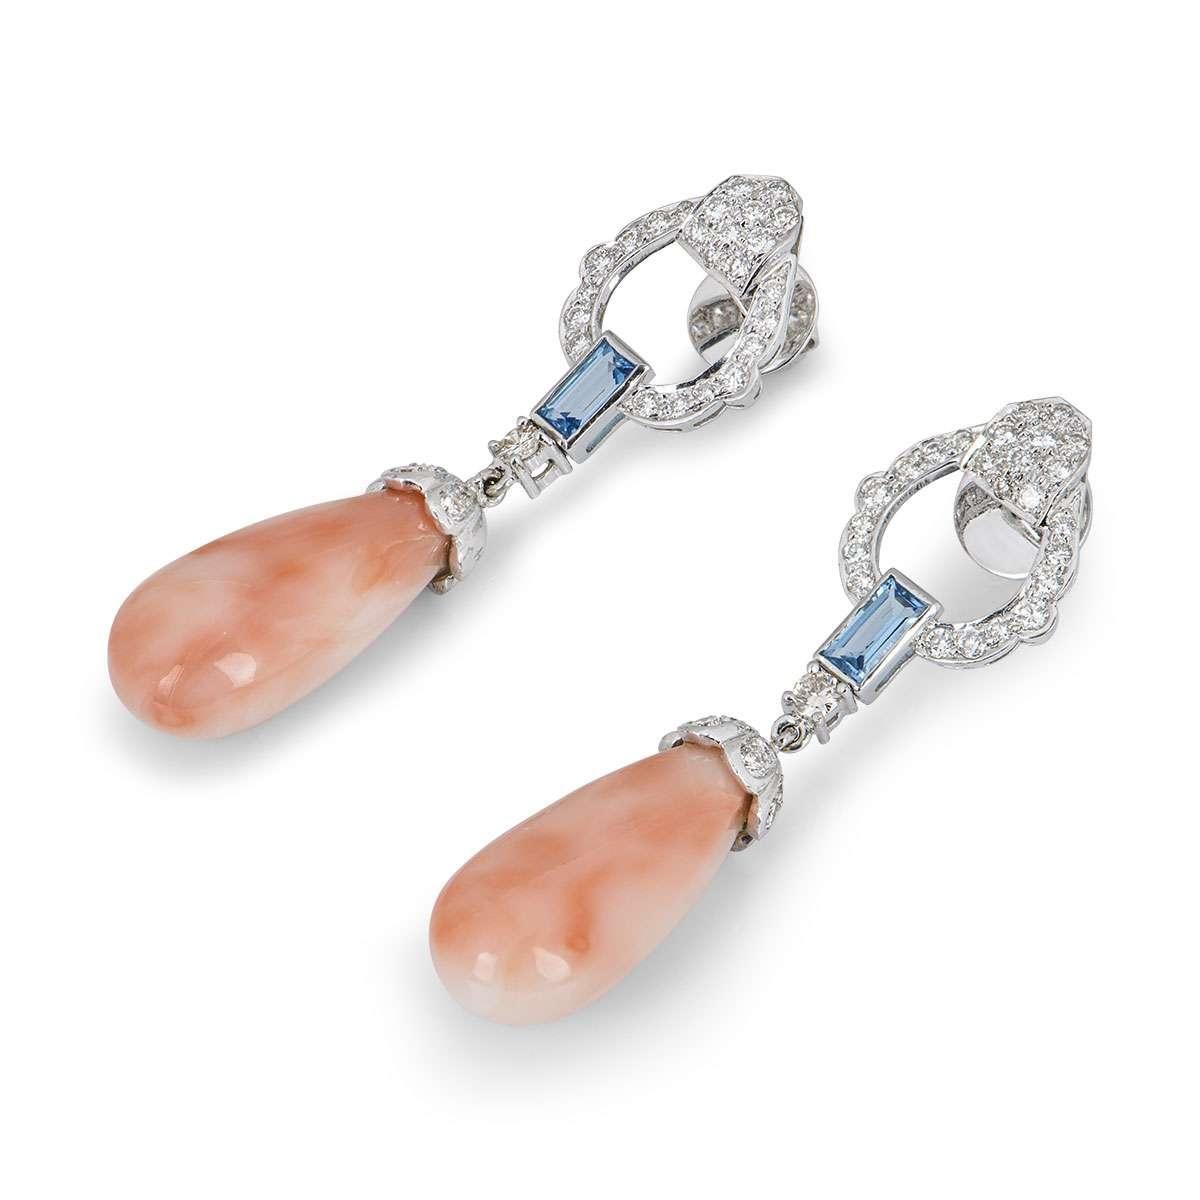 Baguette Cut White Gold Coral, Diamond and Topaz Drop Earrings